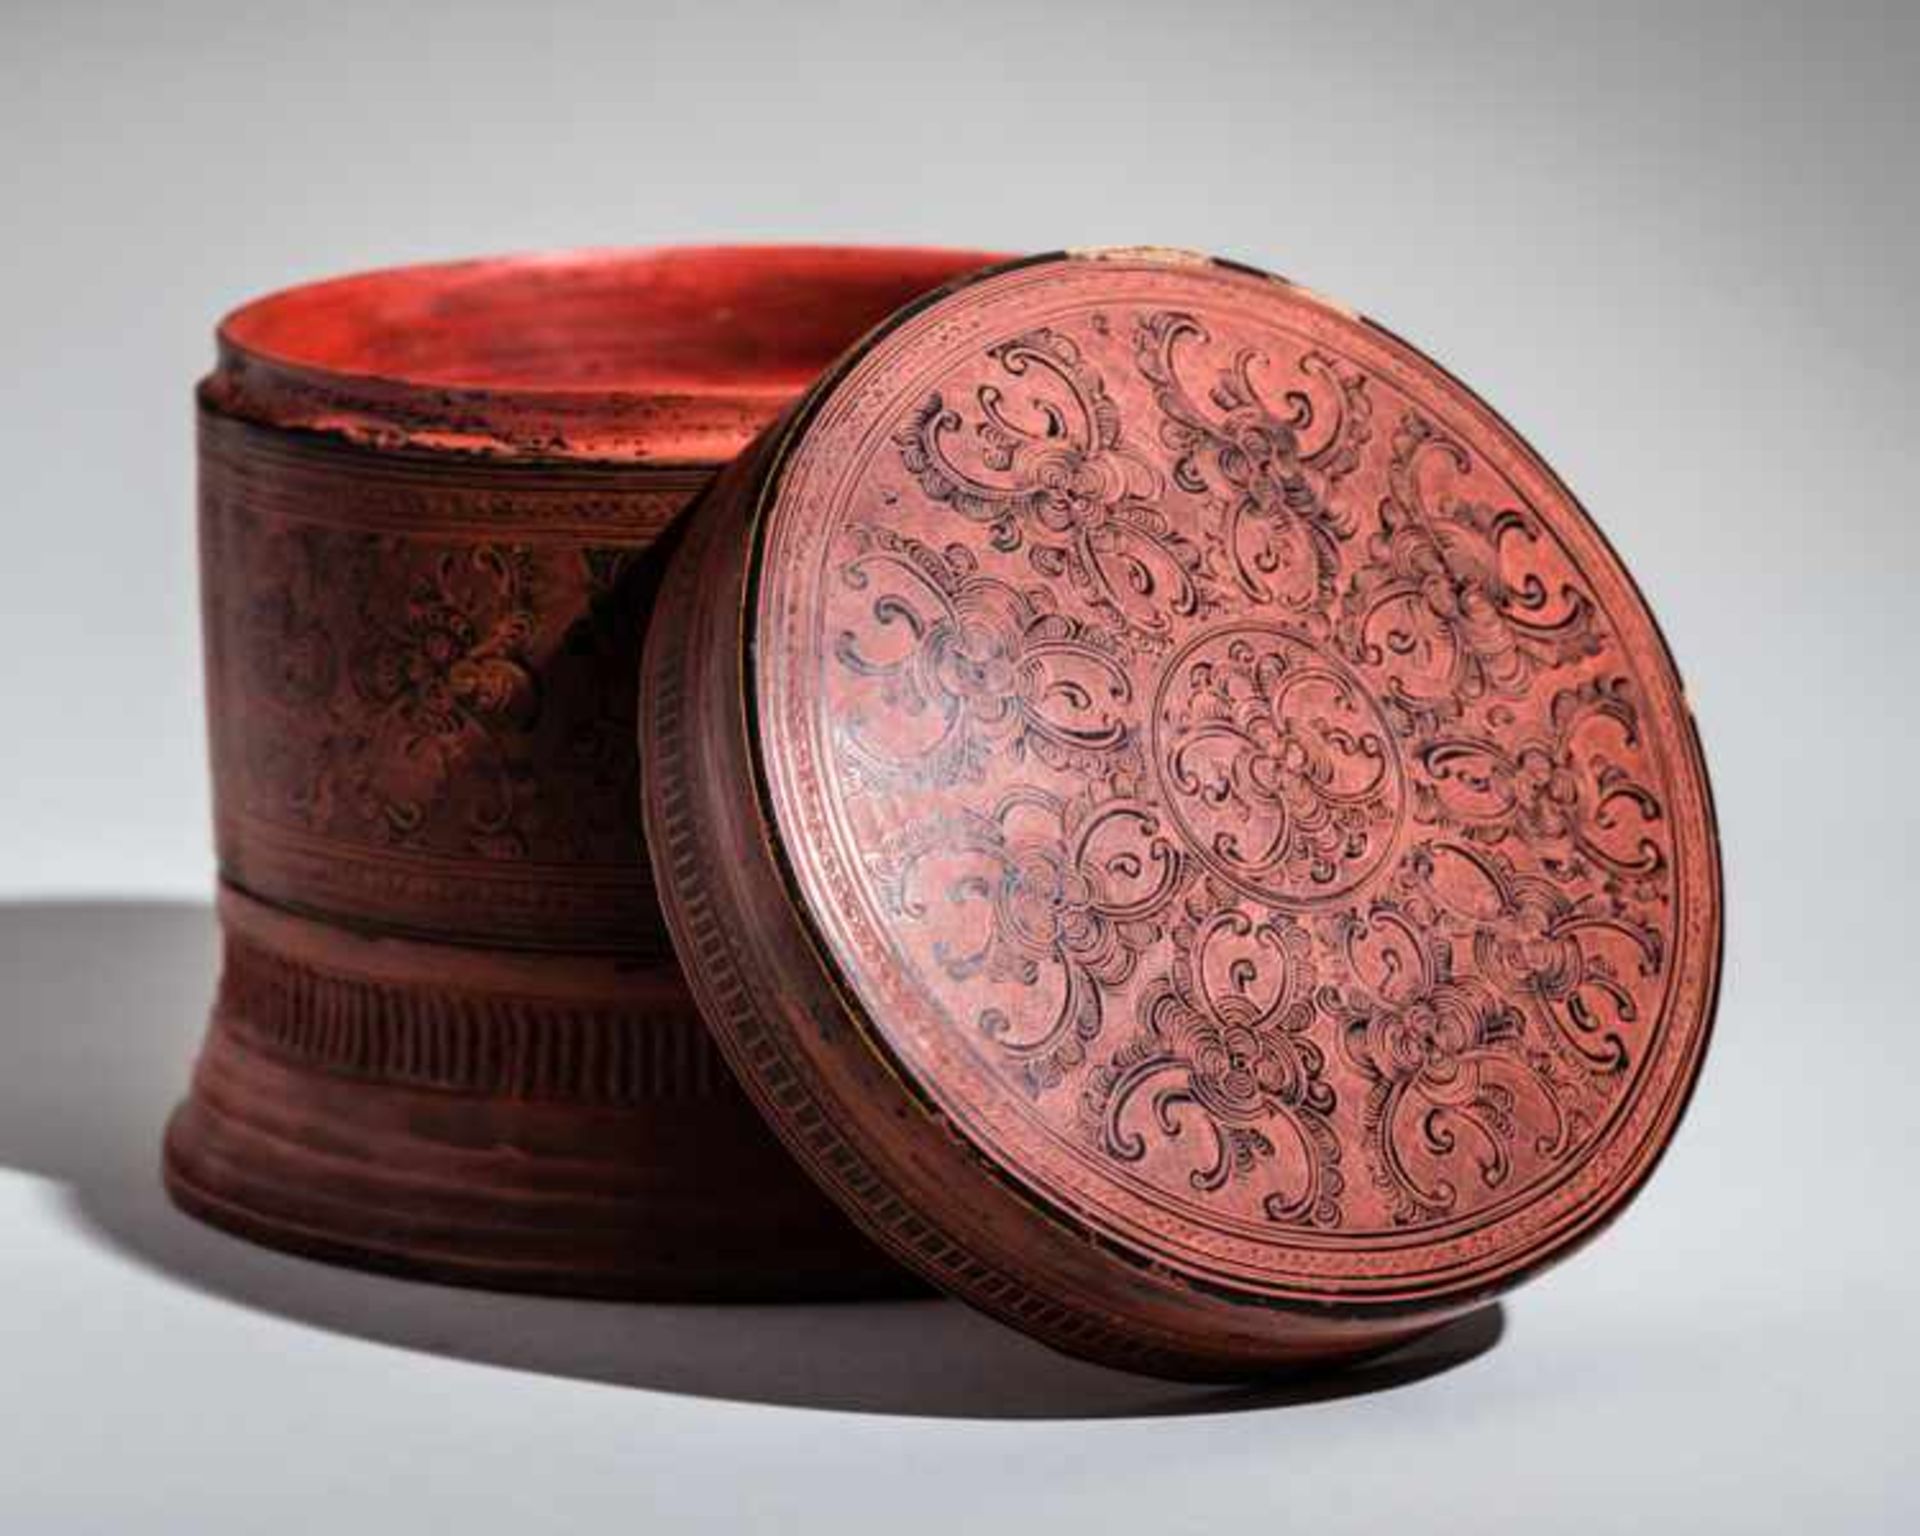 COSMETIC BOX BI-IT Lacquer technique, wood and bamboo. Burma, late Konbaung, 19th cent.A four- - Image 3 of 4